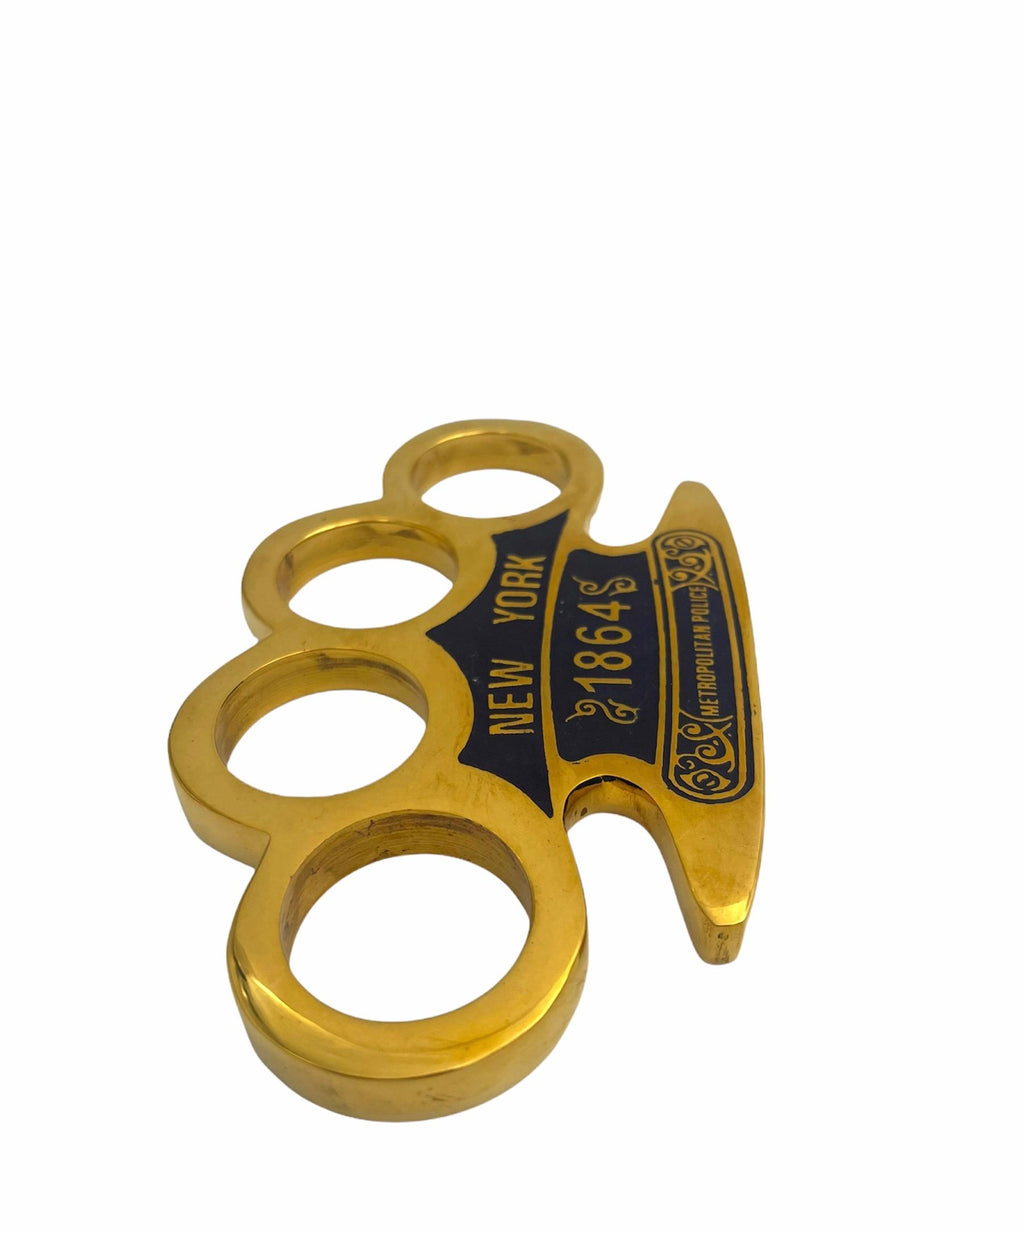 BRASS WITH NEW YORK1864 NAVY BLUE COLOR FILLED KNUCKLE